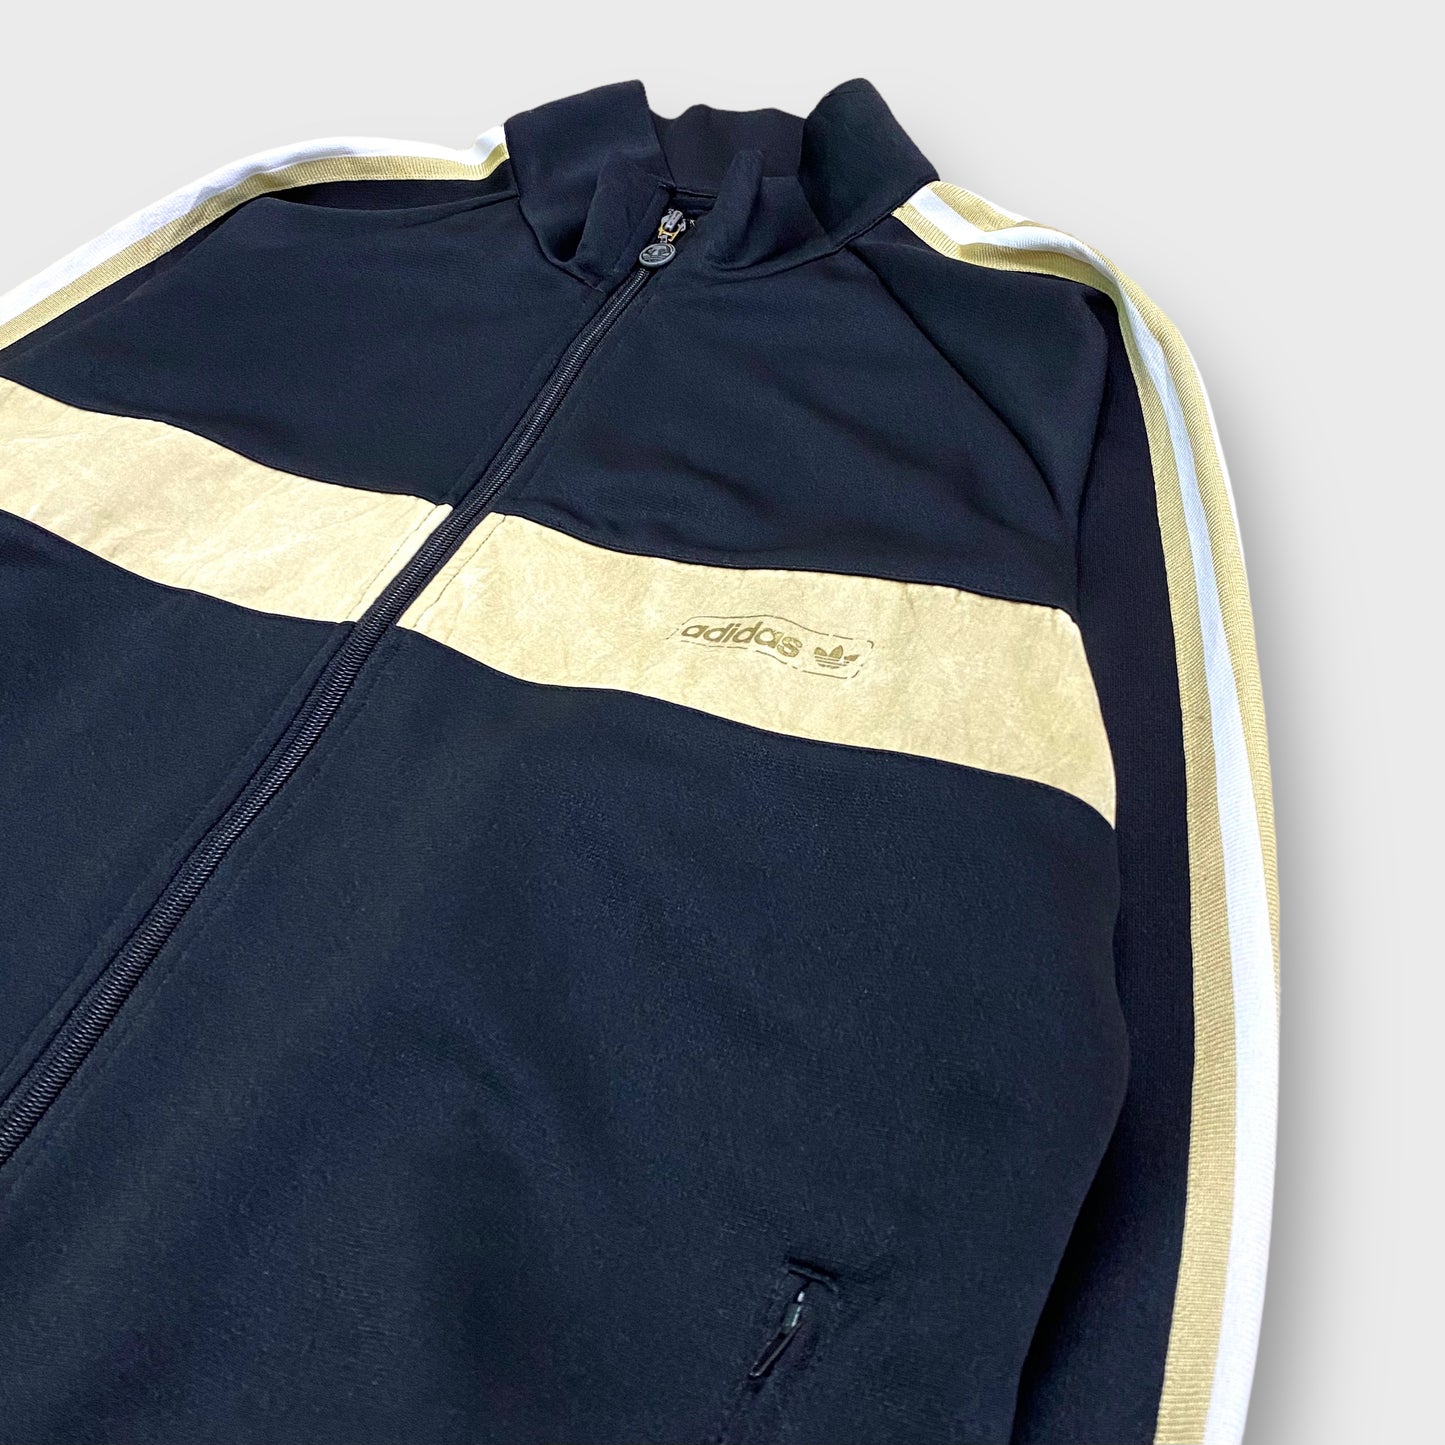 90’s "adidas" Fabric switched track jacket